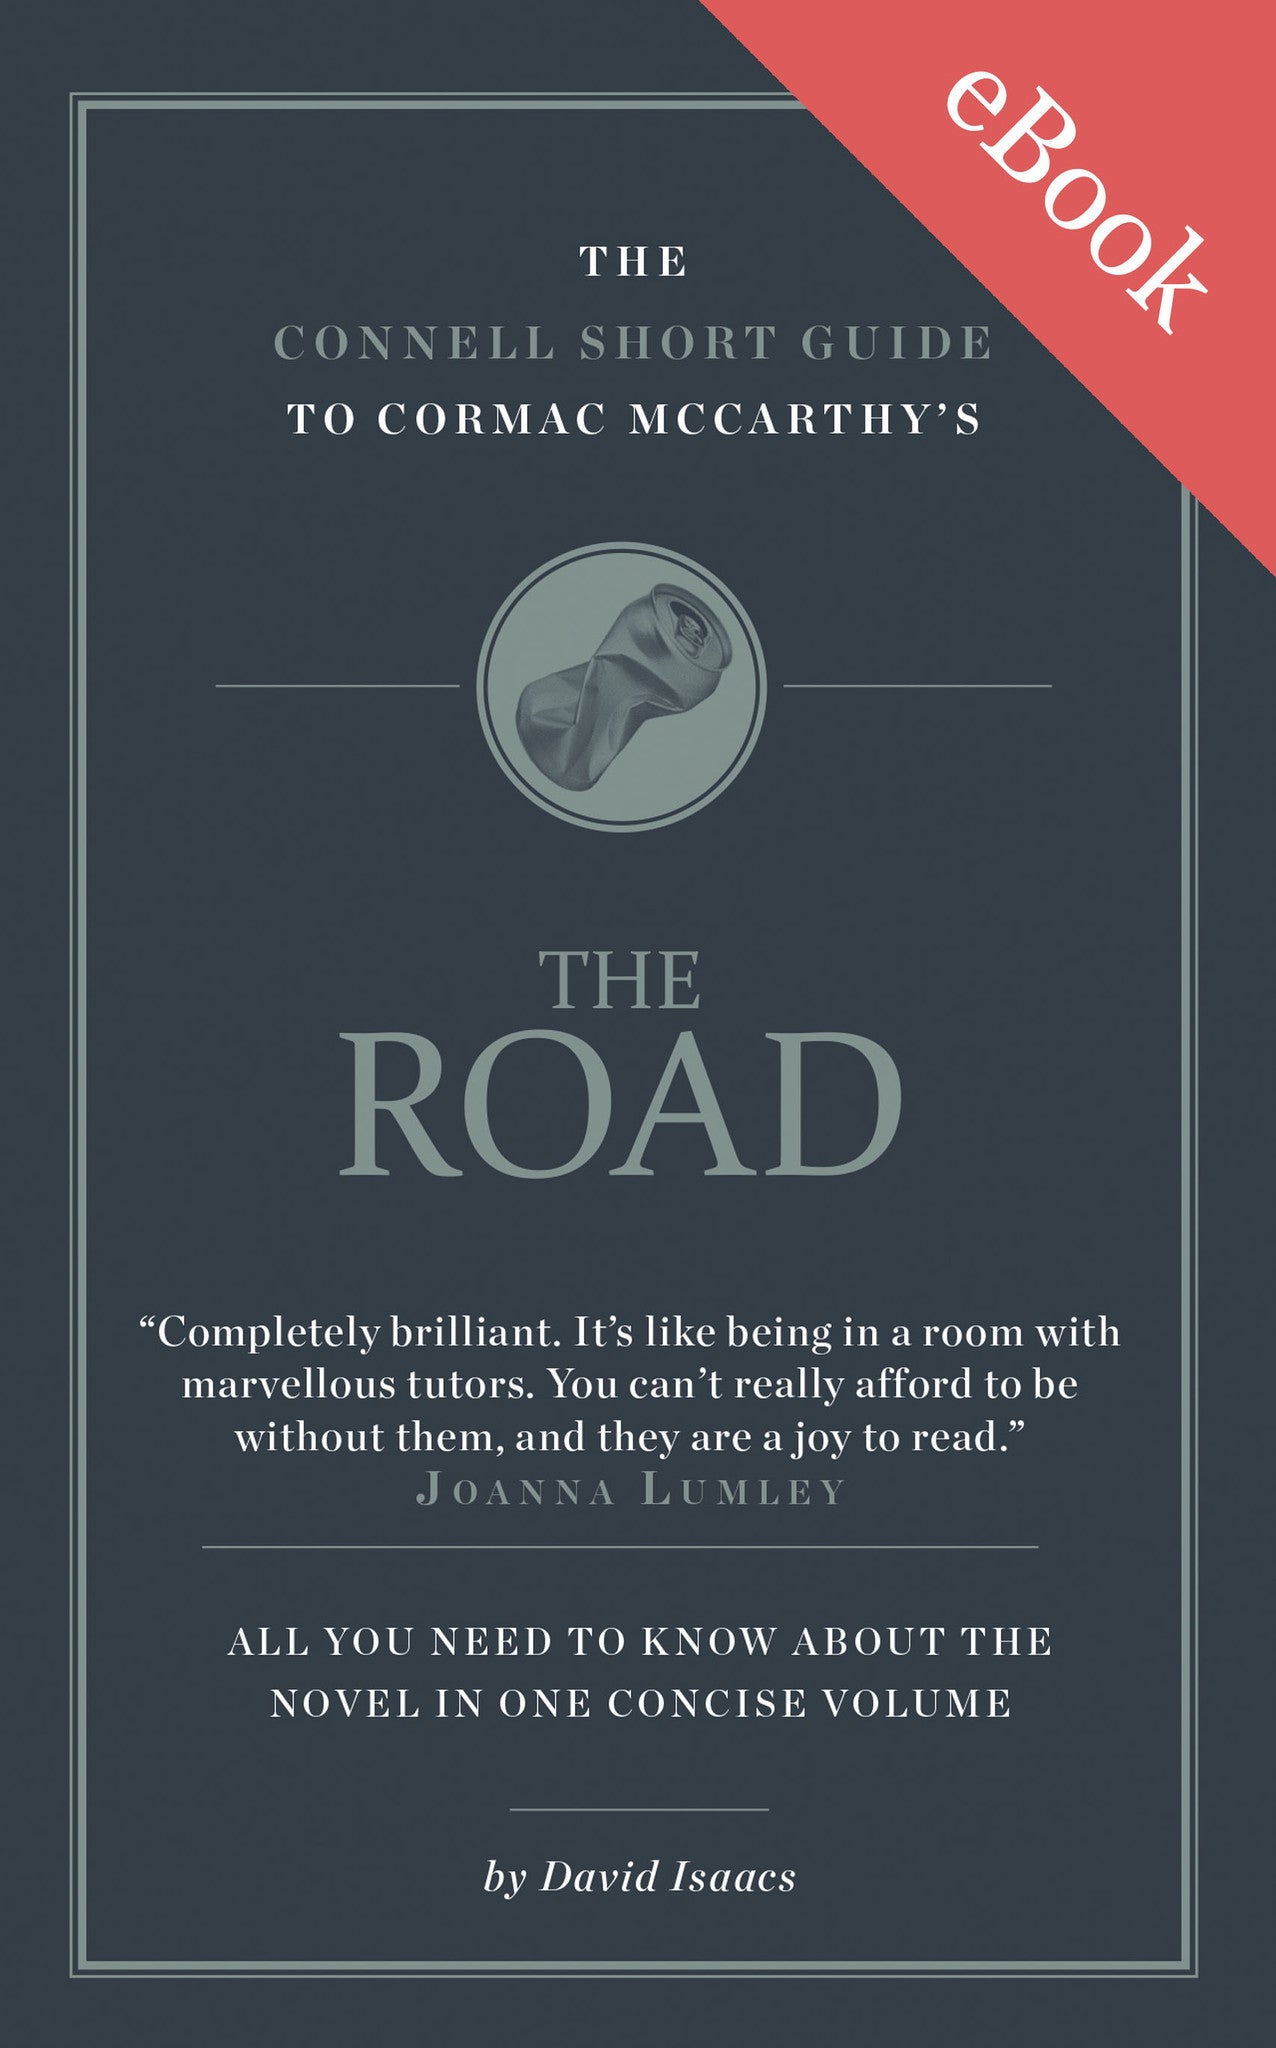 Cormac McCarthy’s The Road Short Study Guide